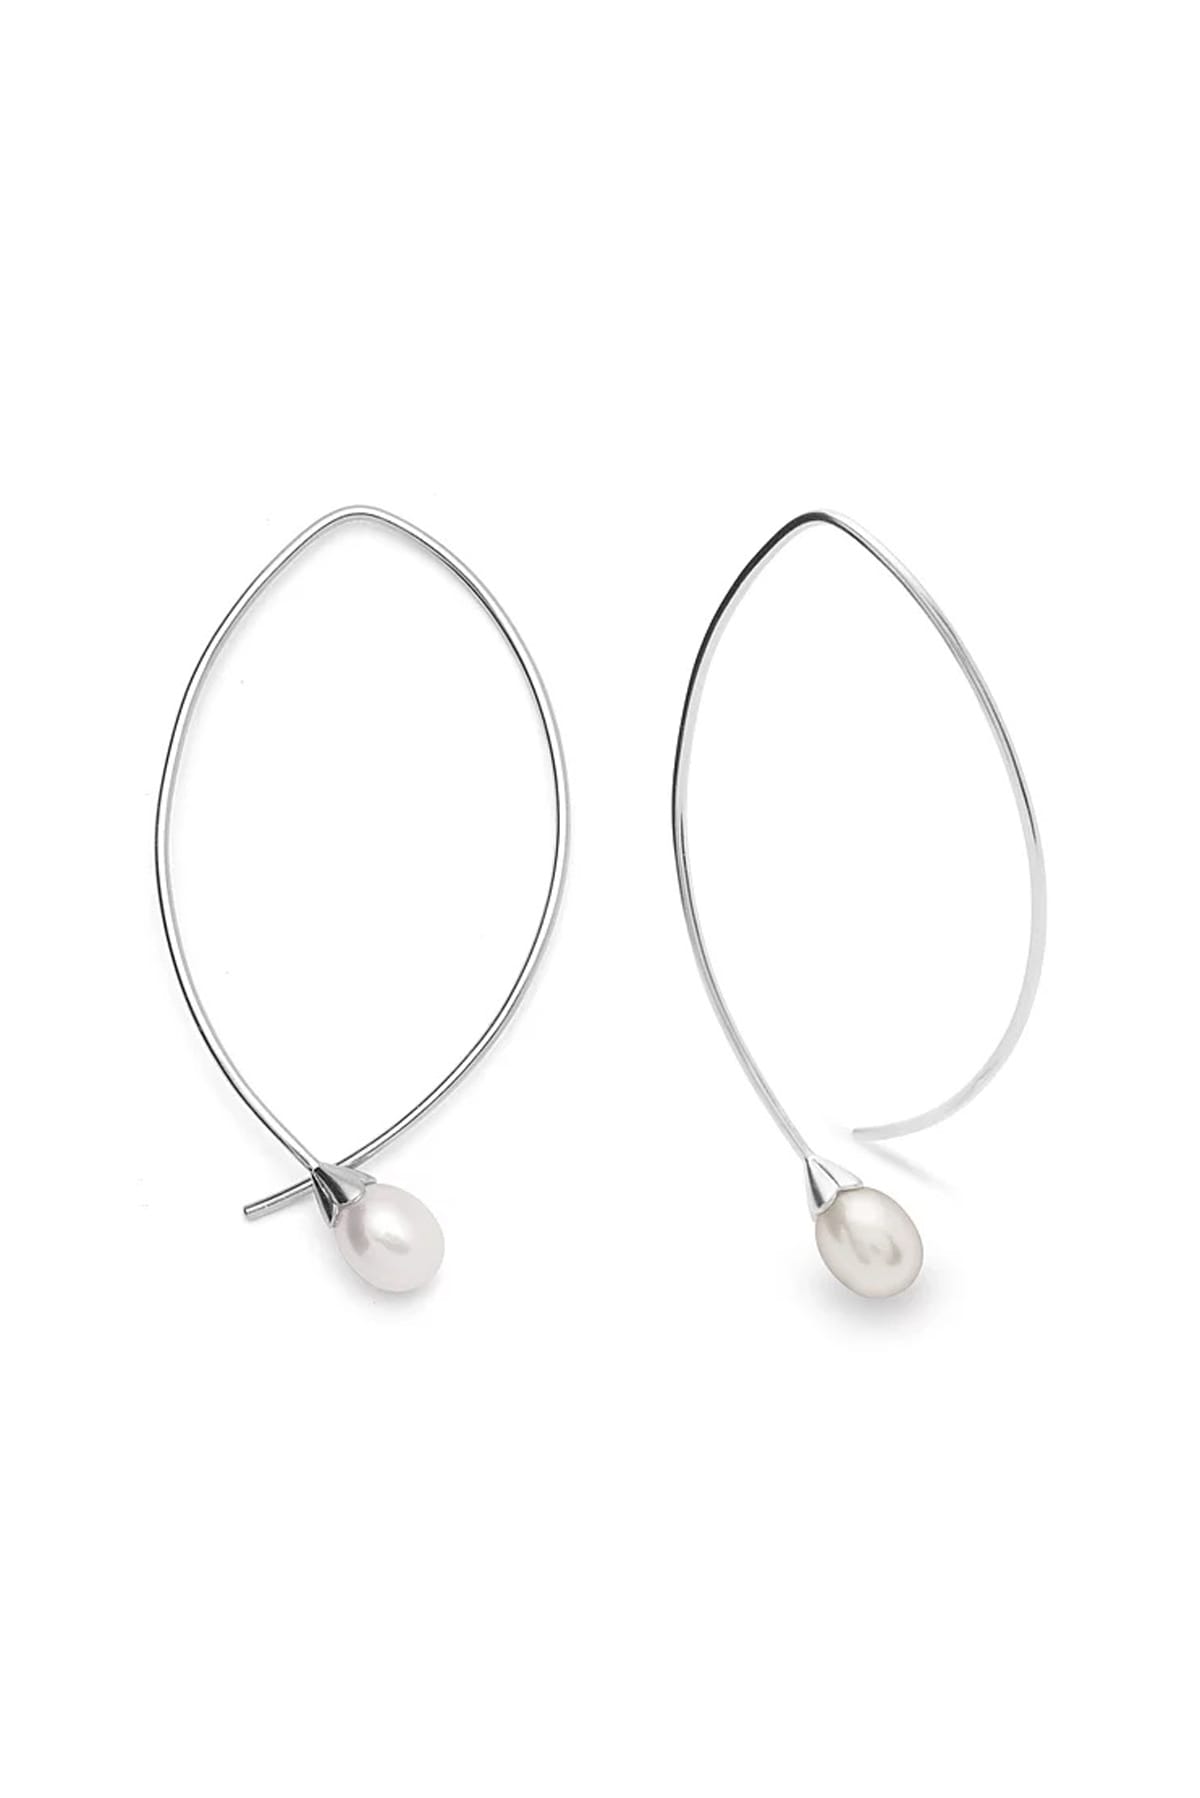 Silver Hook Earrings with Freshwater Pearls available at LeGassick Diamonds and Jewellery Gold Coast, Australia.